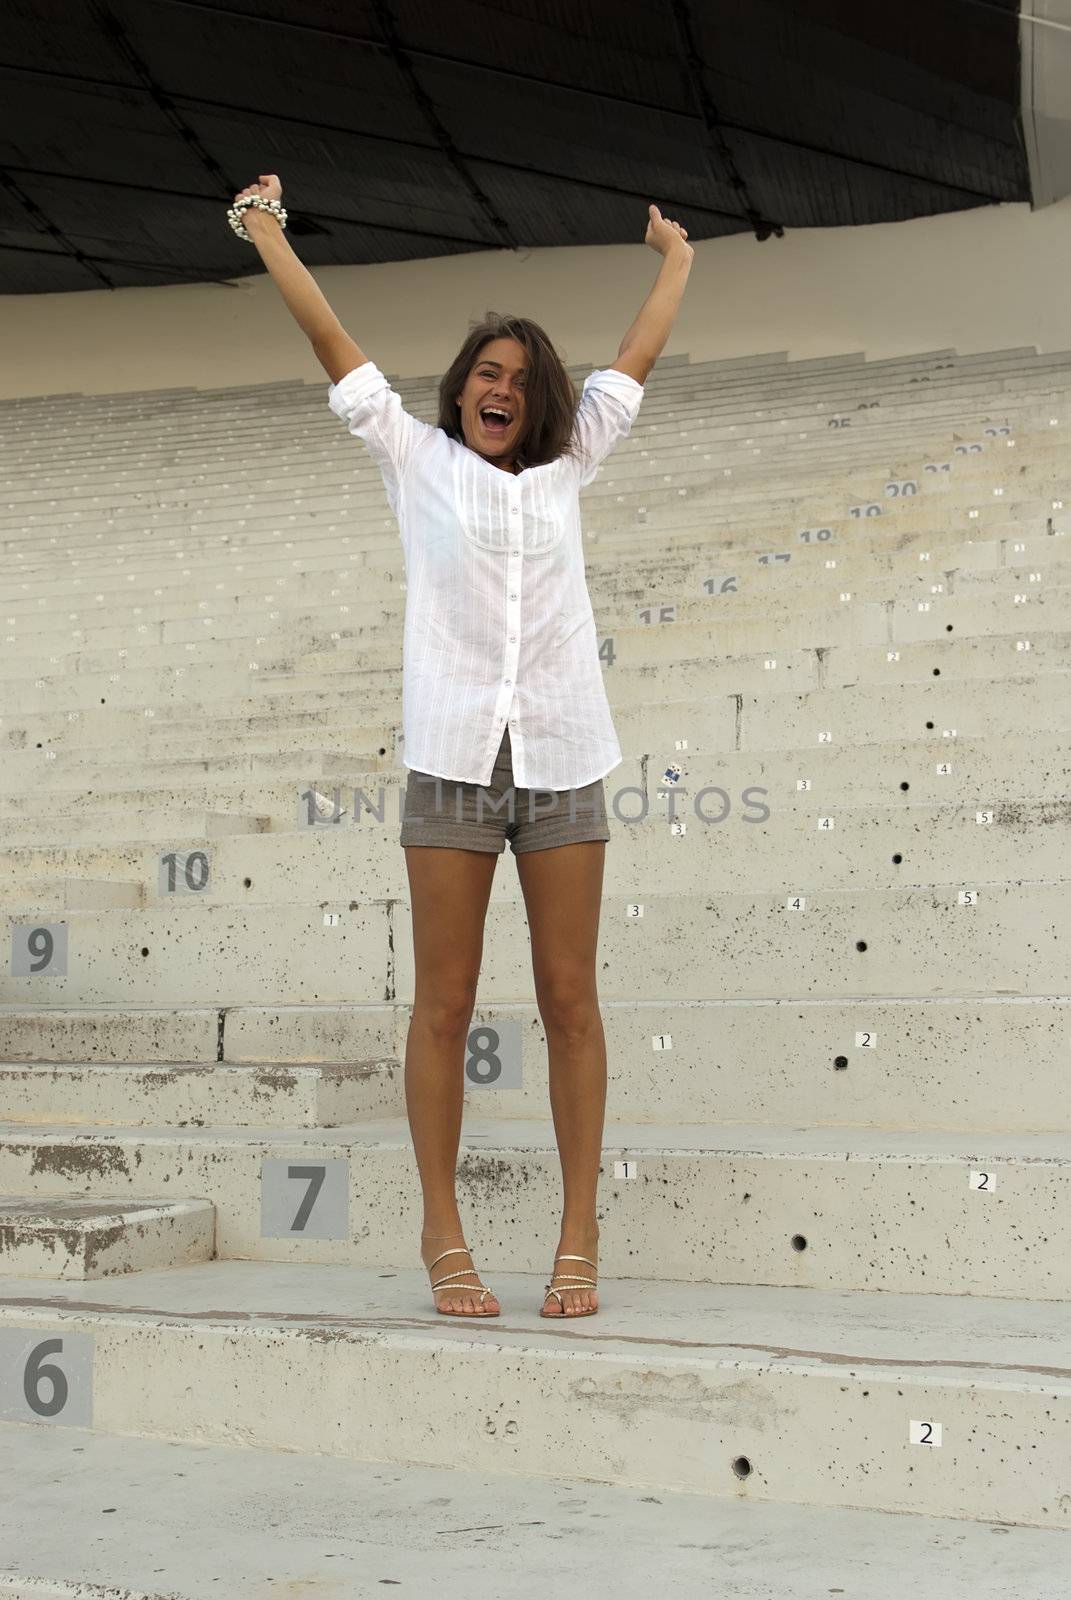 Beautiful girl jumping in an empty stadium by dmitrimaruta